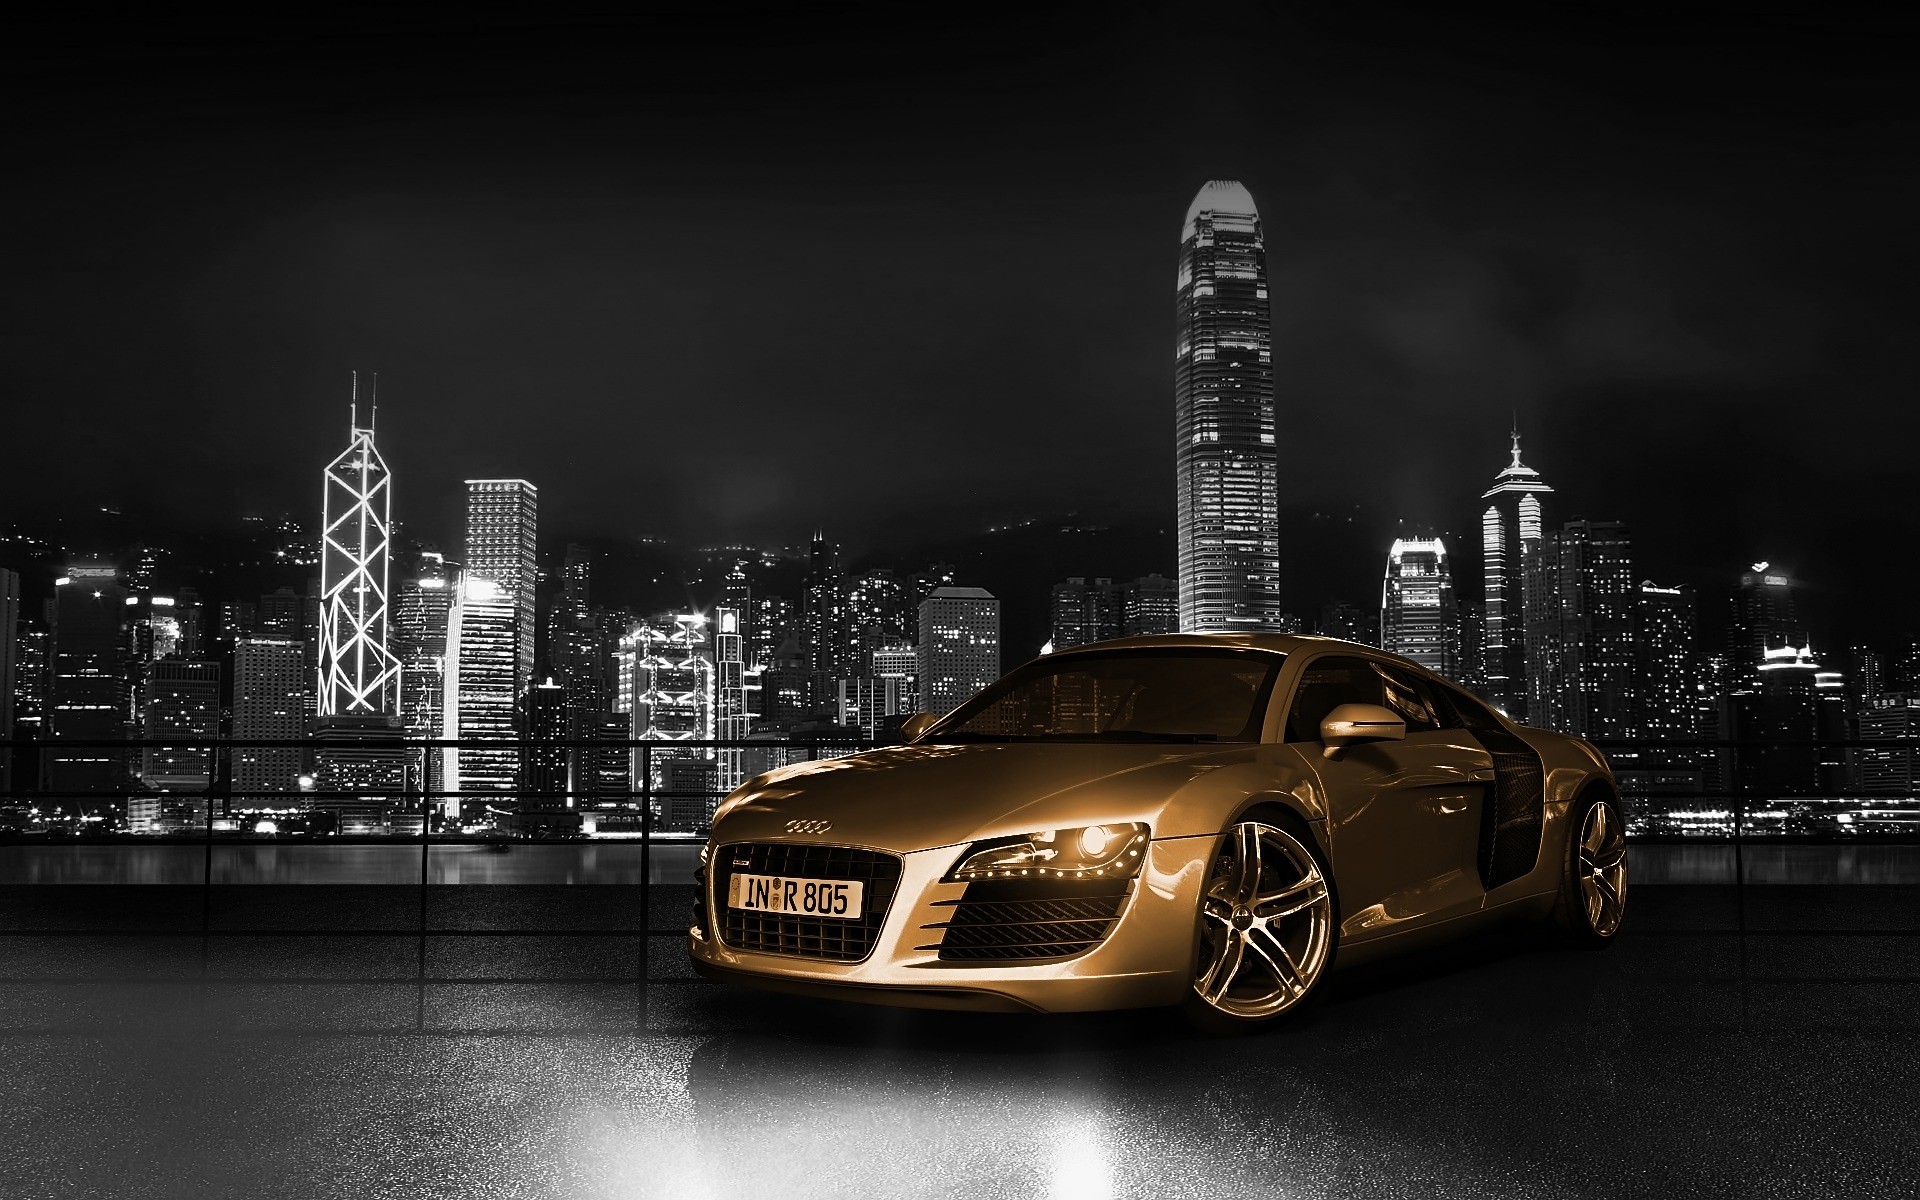 1920x1200 Related Wallpapers from Jaguar Logo Up Close Wallpaper. Audi R8 Wallpapers